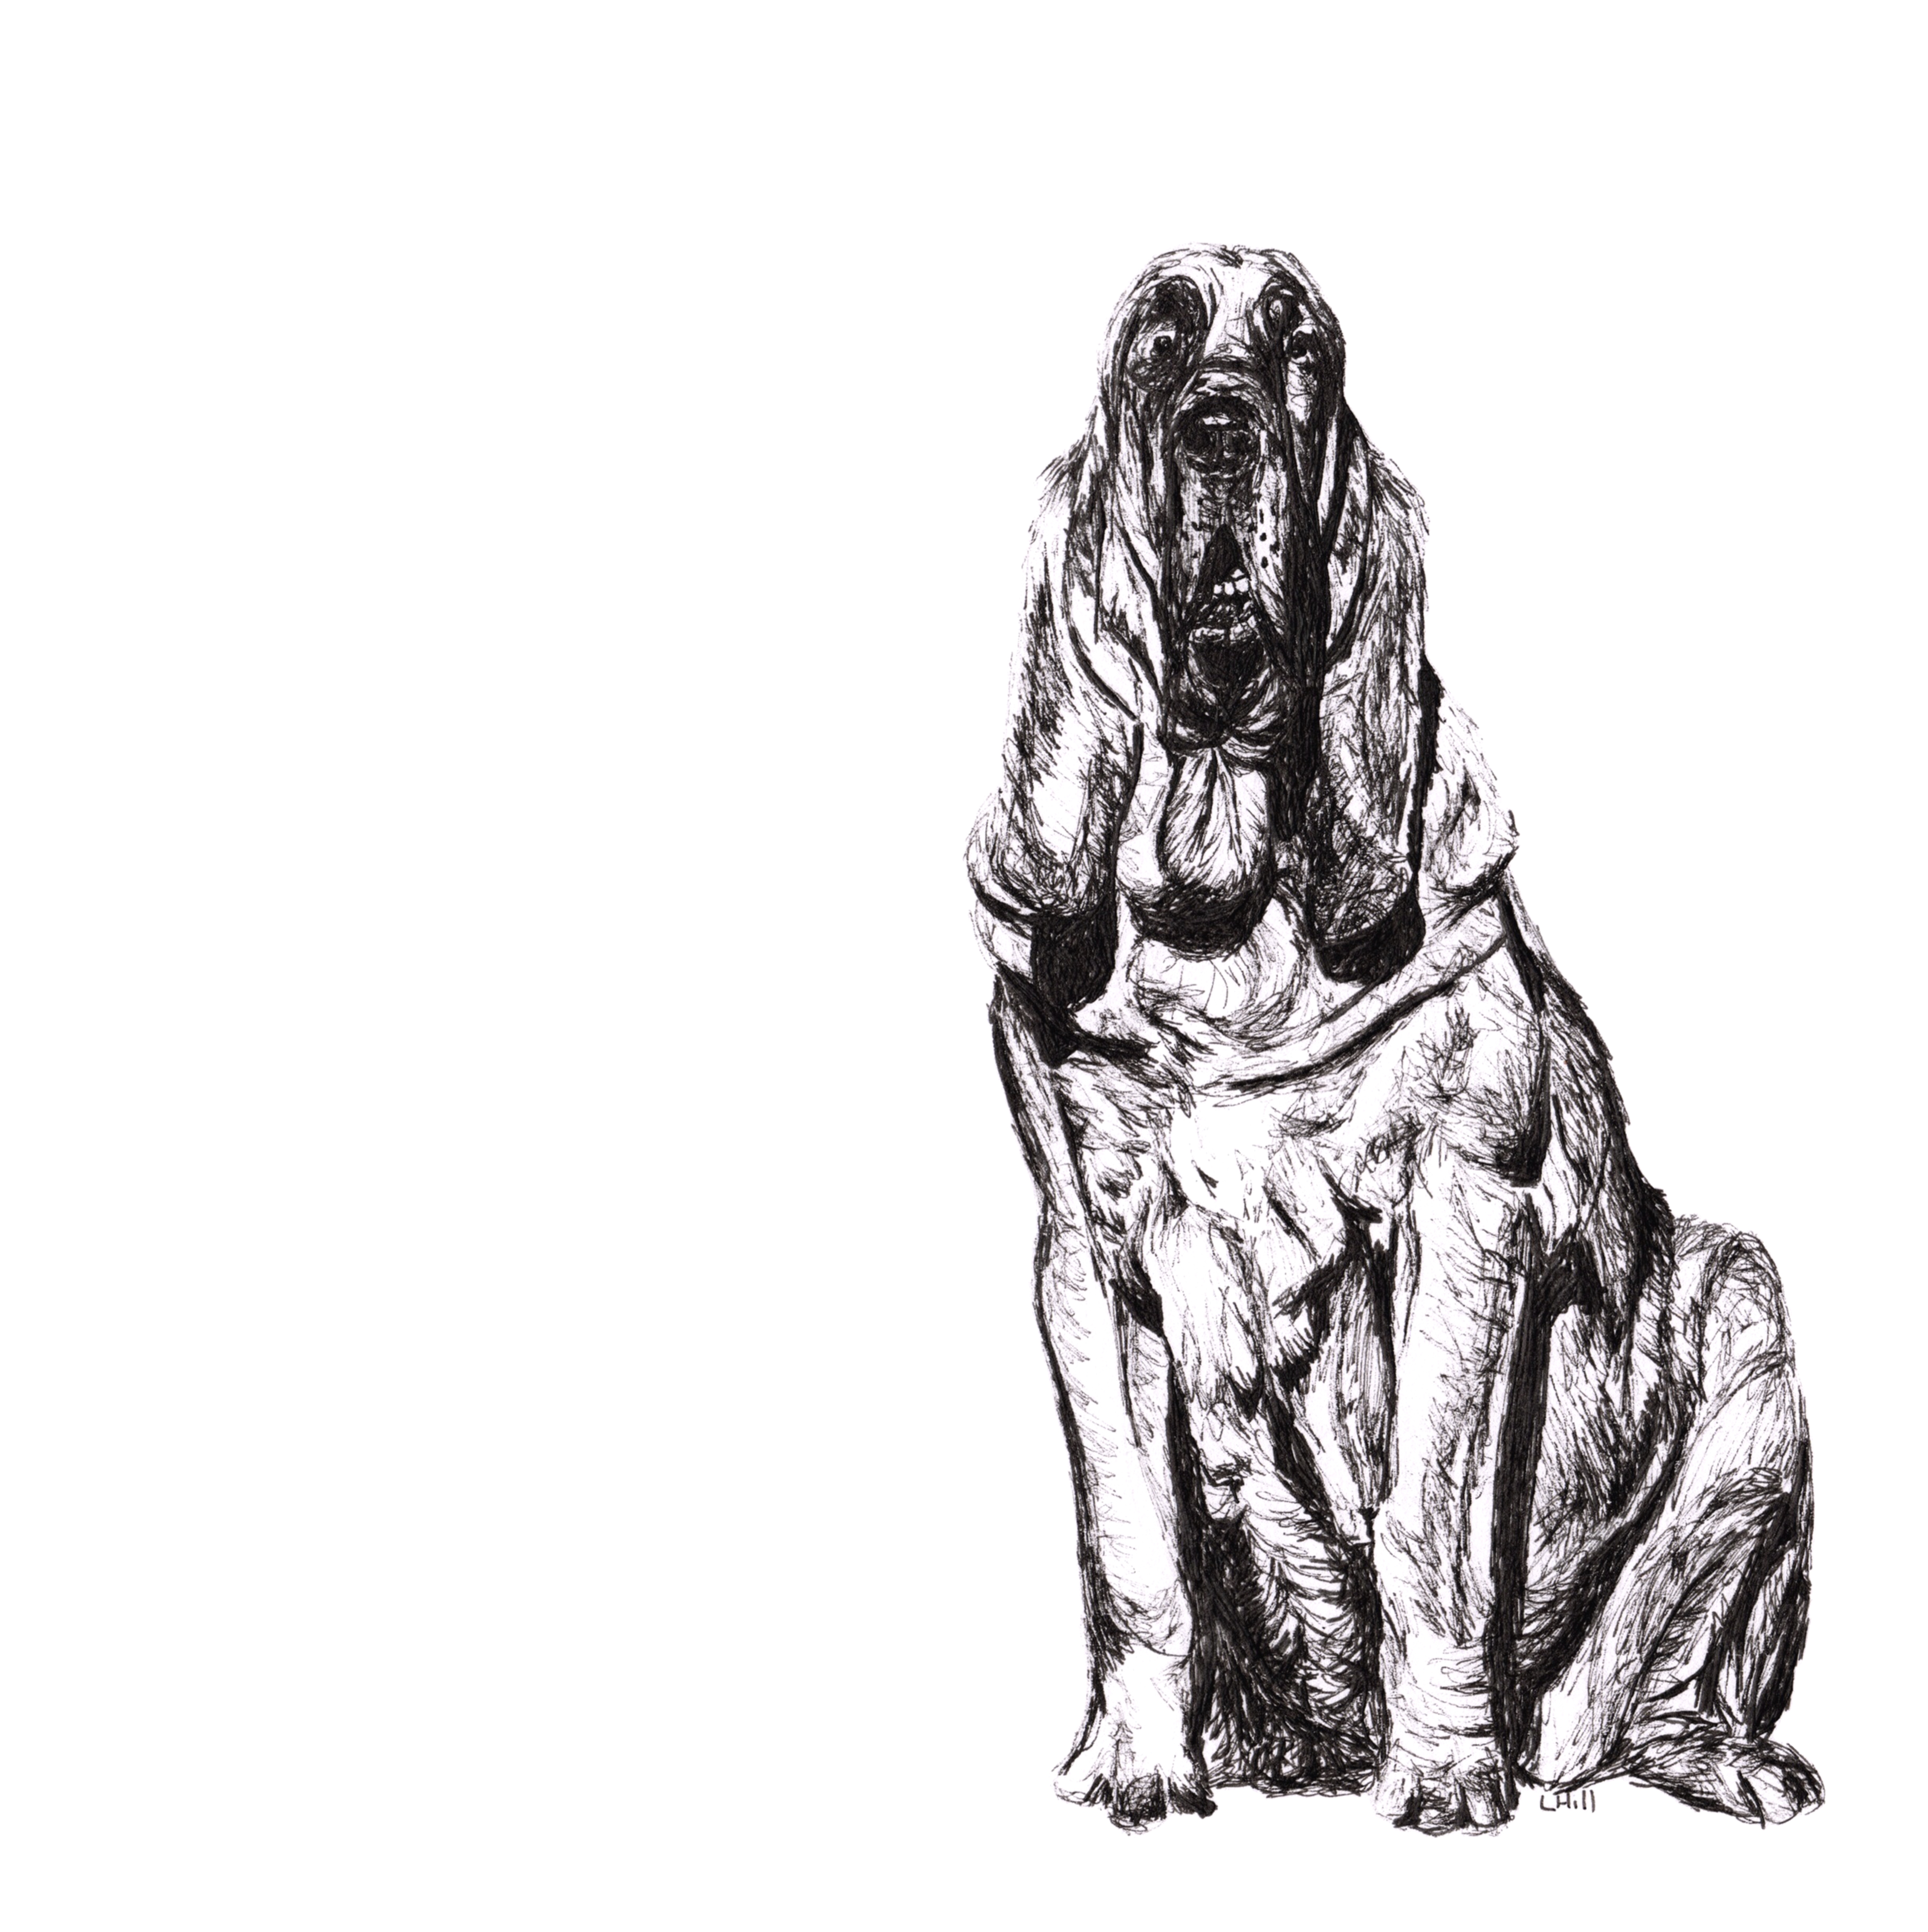 Bloodhound pen and ink illustration by Louisa Hill